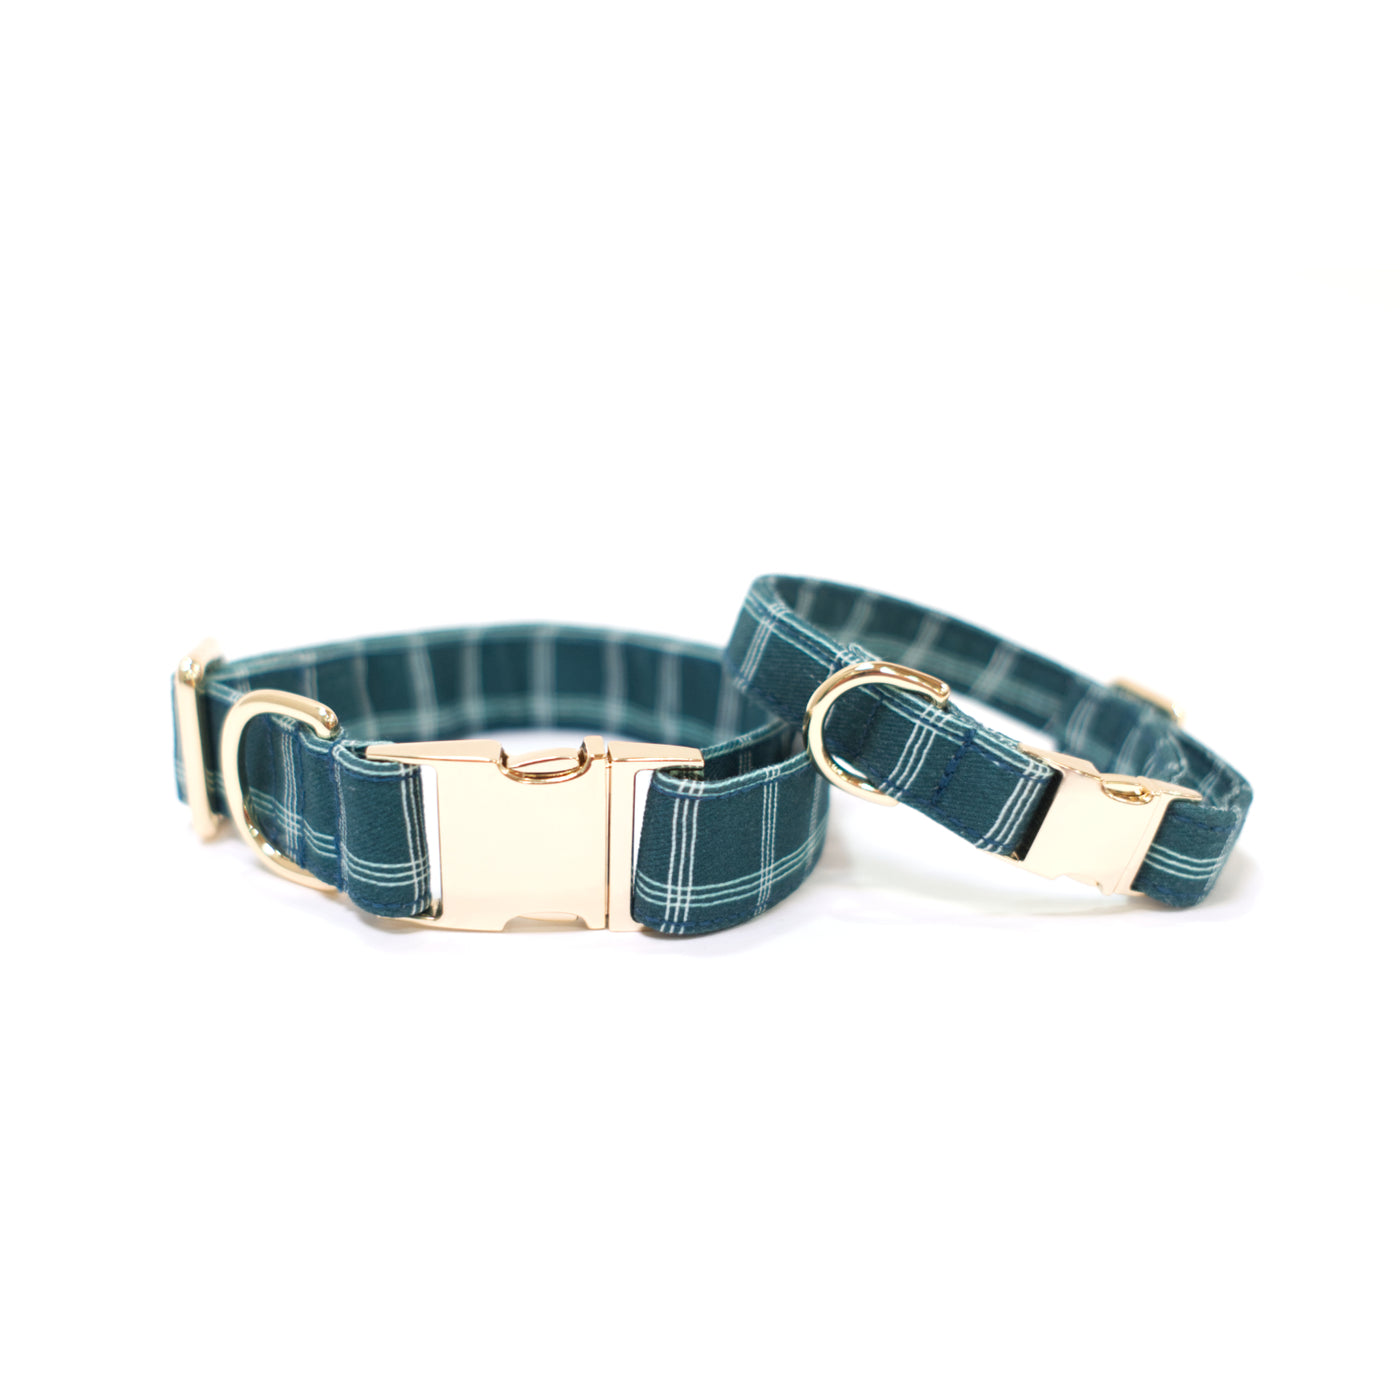 Dog collar in dark teal windowpane print with gold hardware shown in sizes S & M